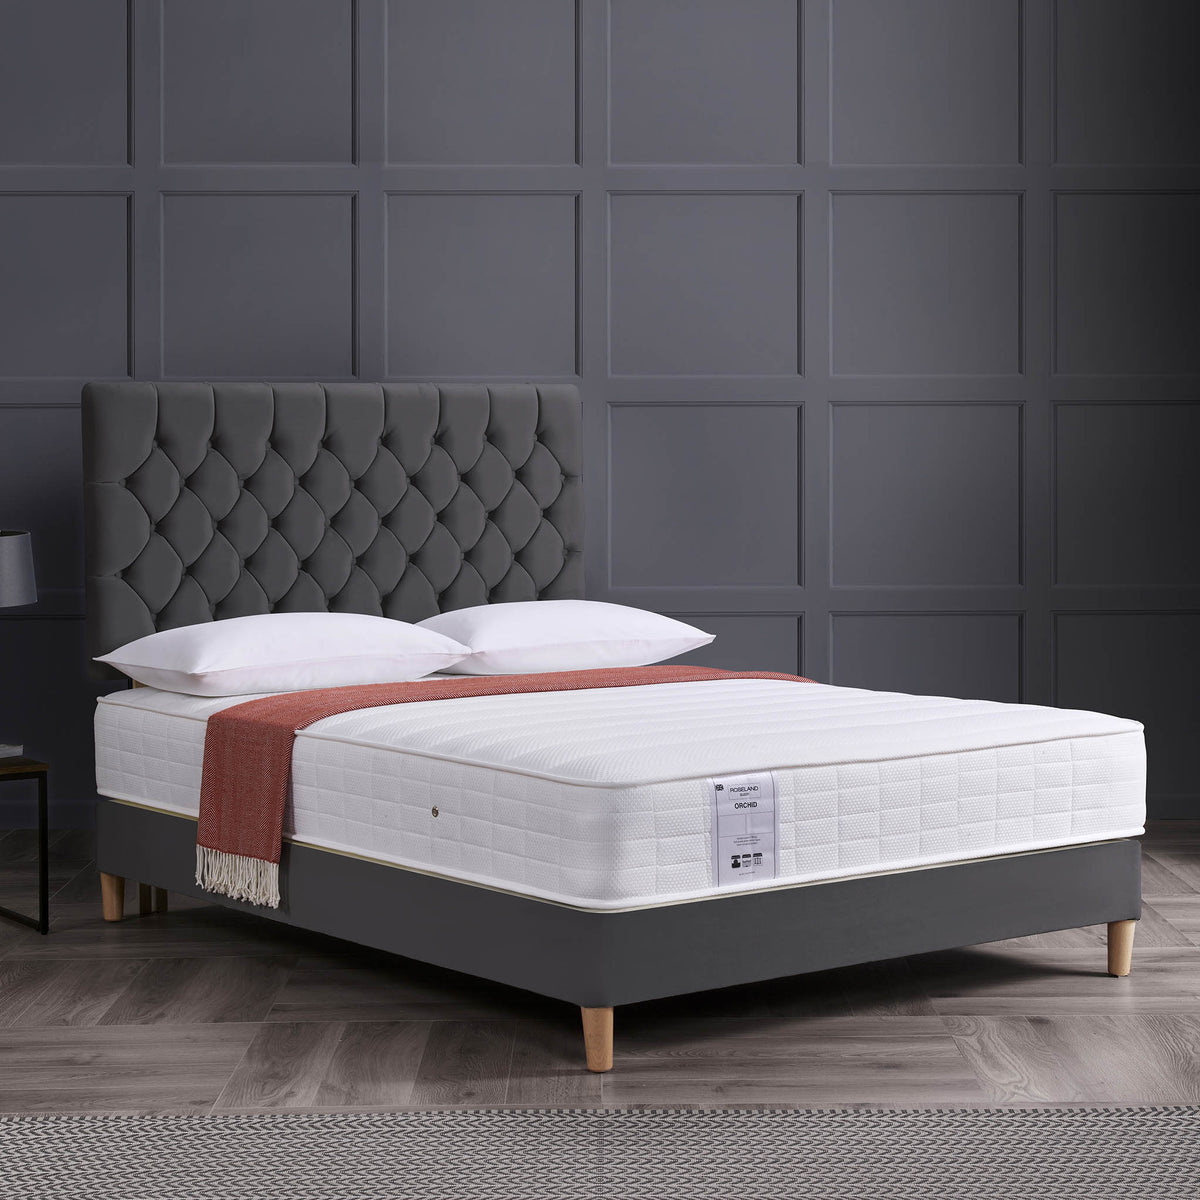 Orchid Comfort Mattress by Roseland Sleep lifestyle image